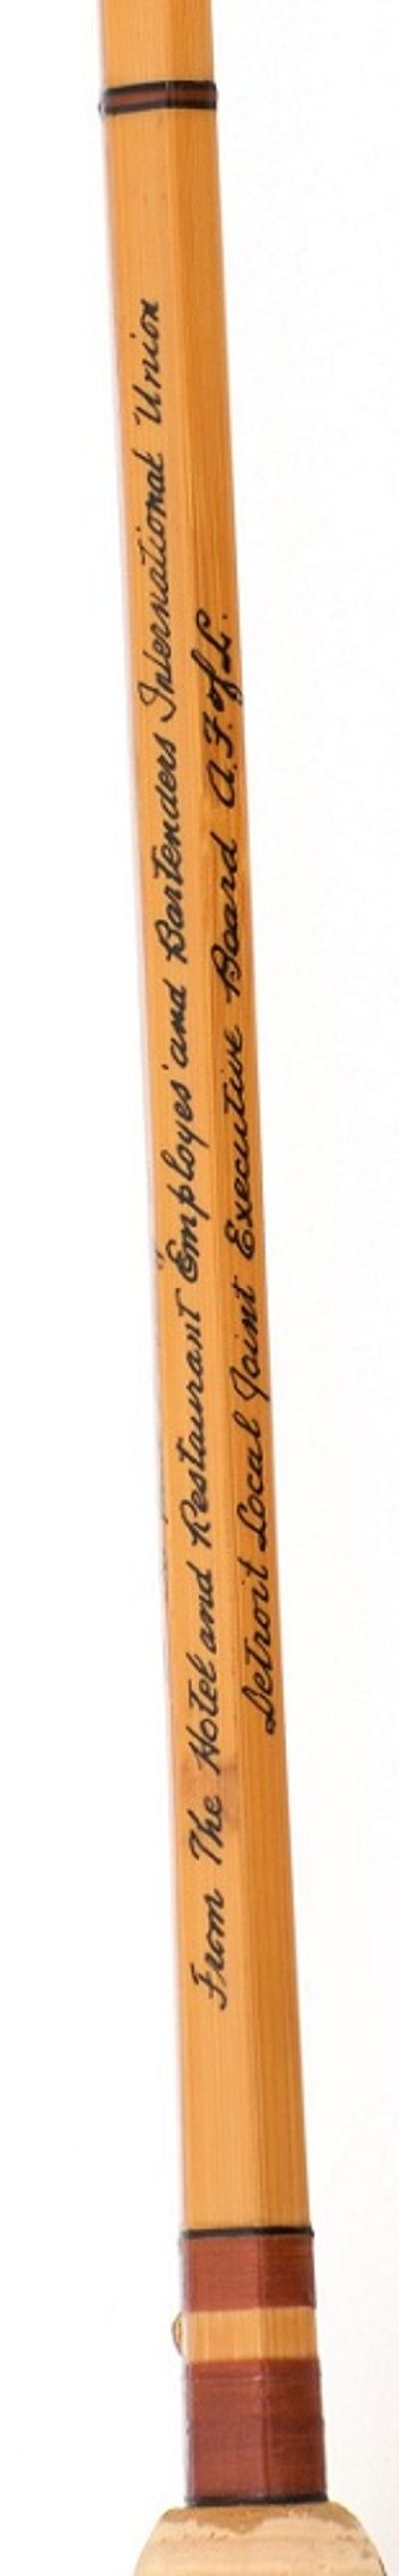 Lyle Dickerson bamboo fly rod, Lyle Dickerson signature, Lyle Dickerson bamboo rod writing model